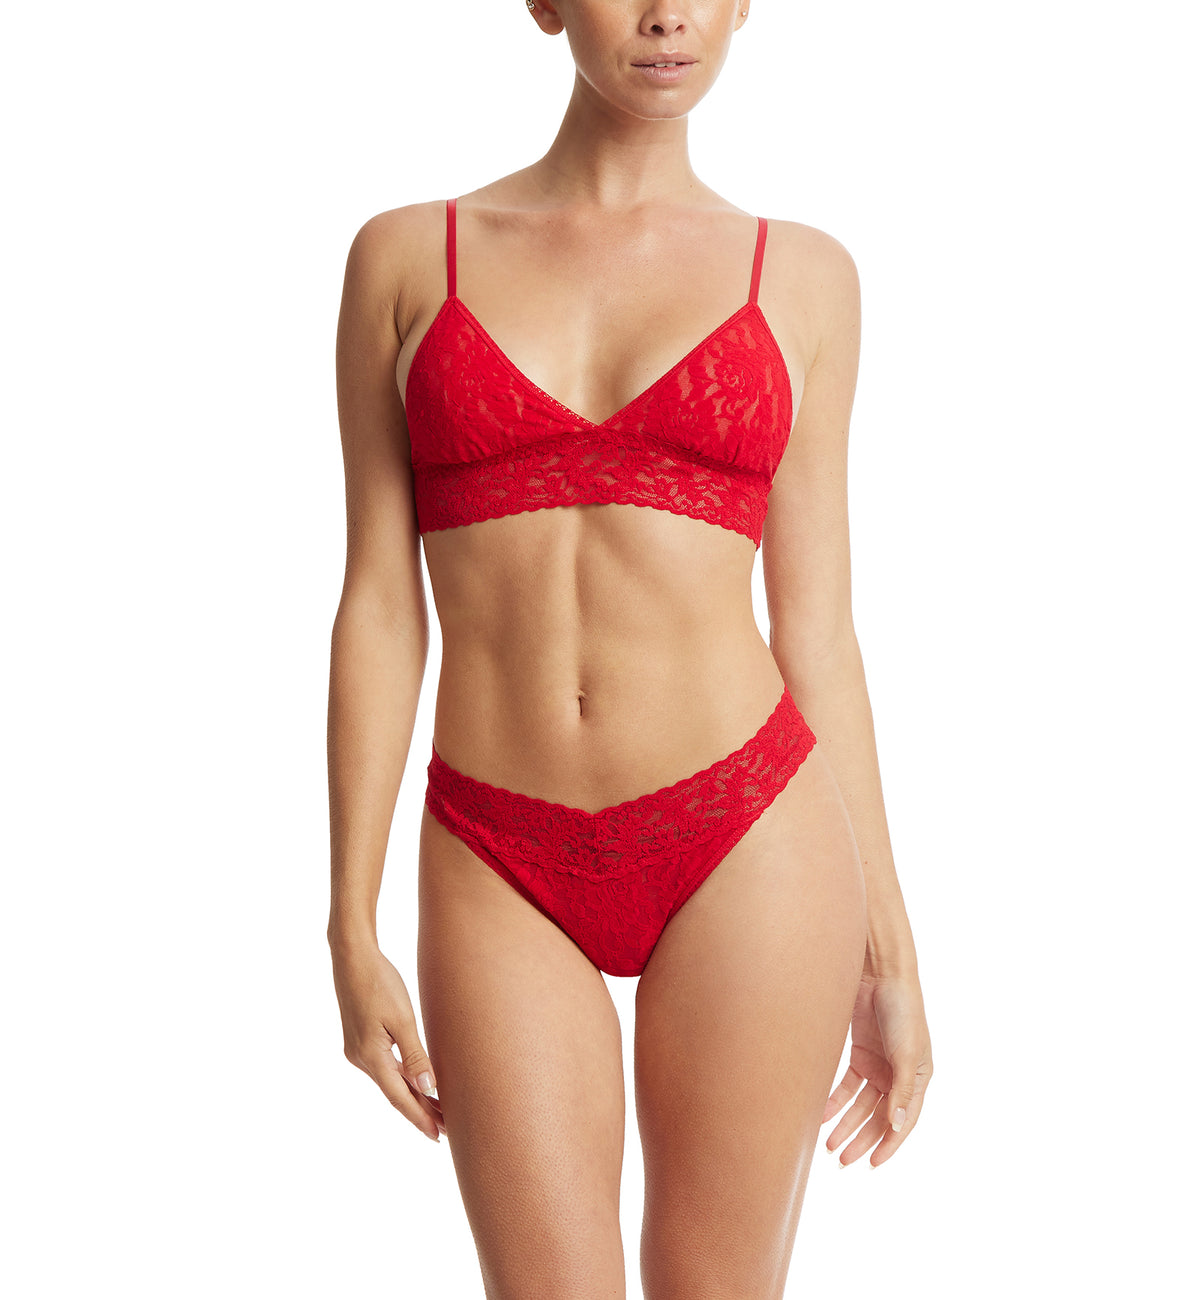 Hanky Panky Signature Lace Padded Triangle Bralette (487004),XS,Red - Red,XS